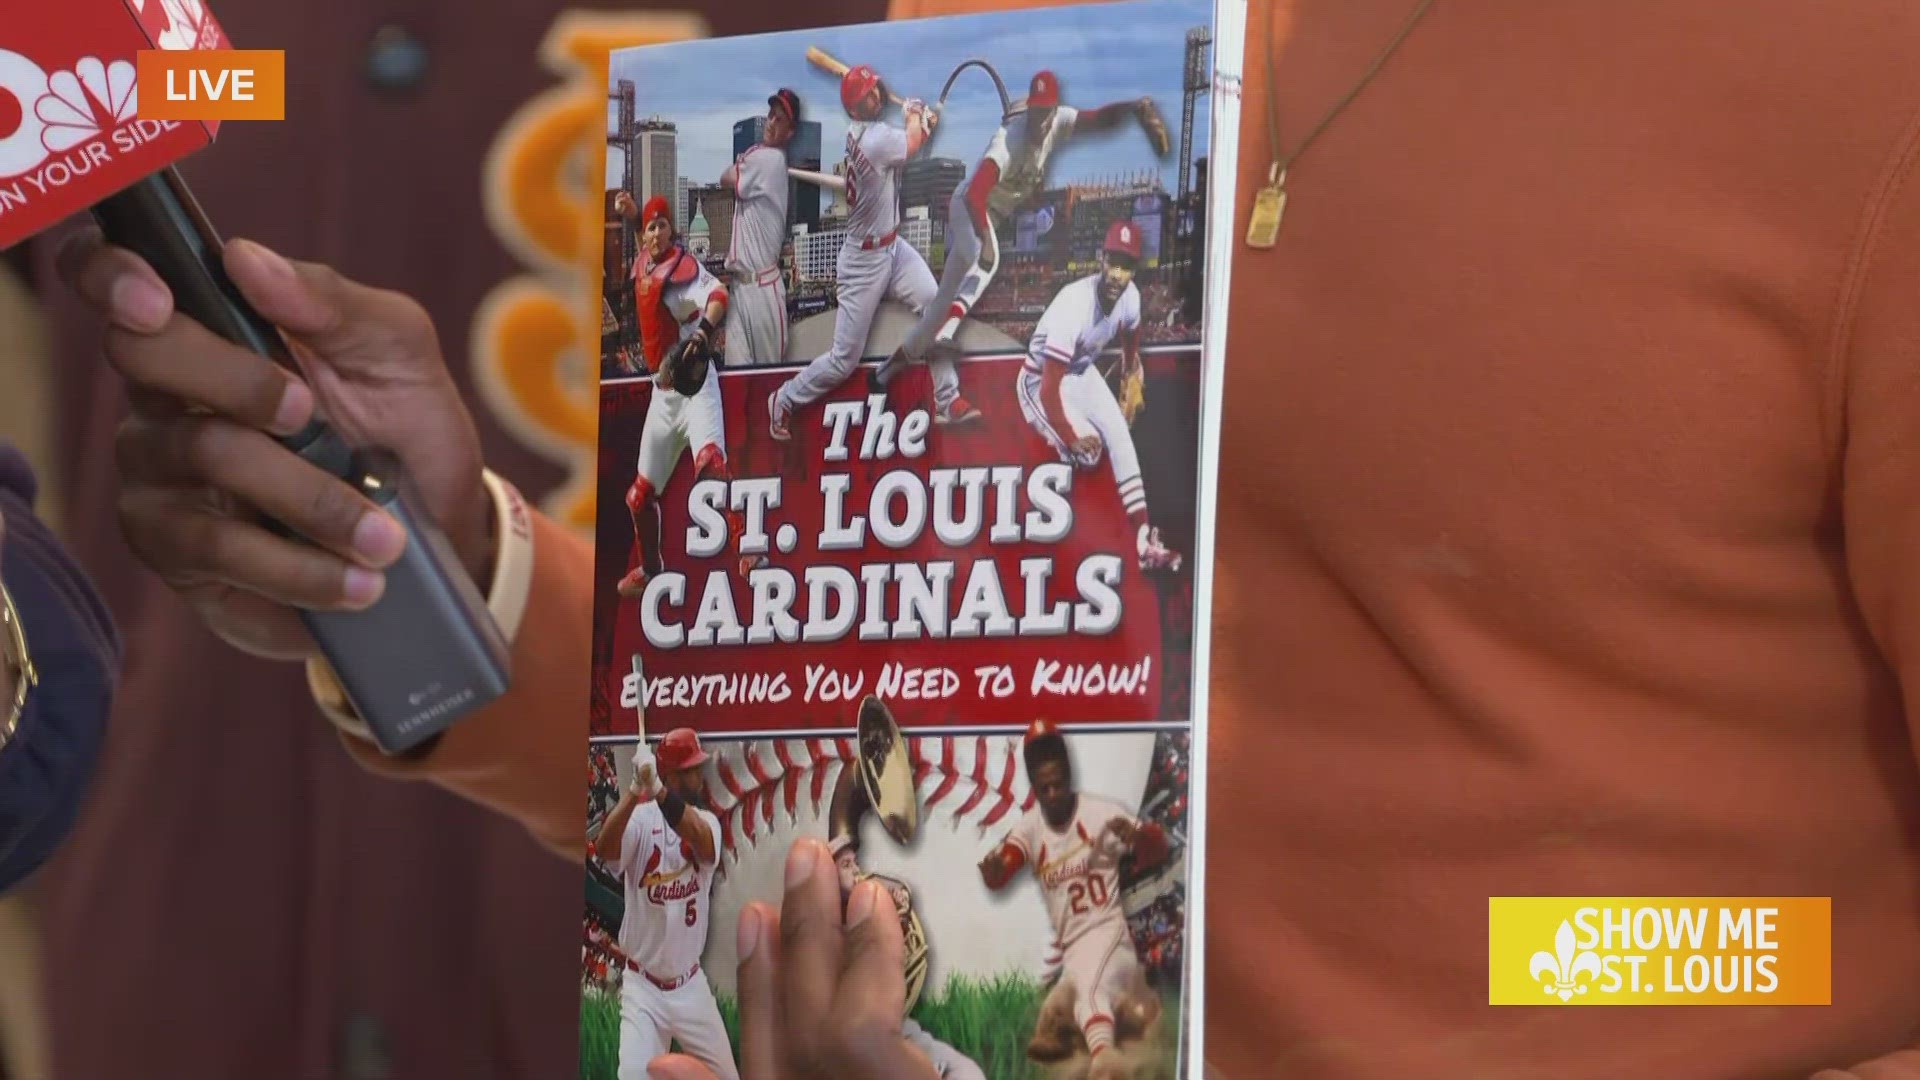 St. Louis Cardinals: Everything You Need to Know!, offers a unique approach to telling the story of Cardinals baseball for fans young and old.